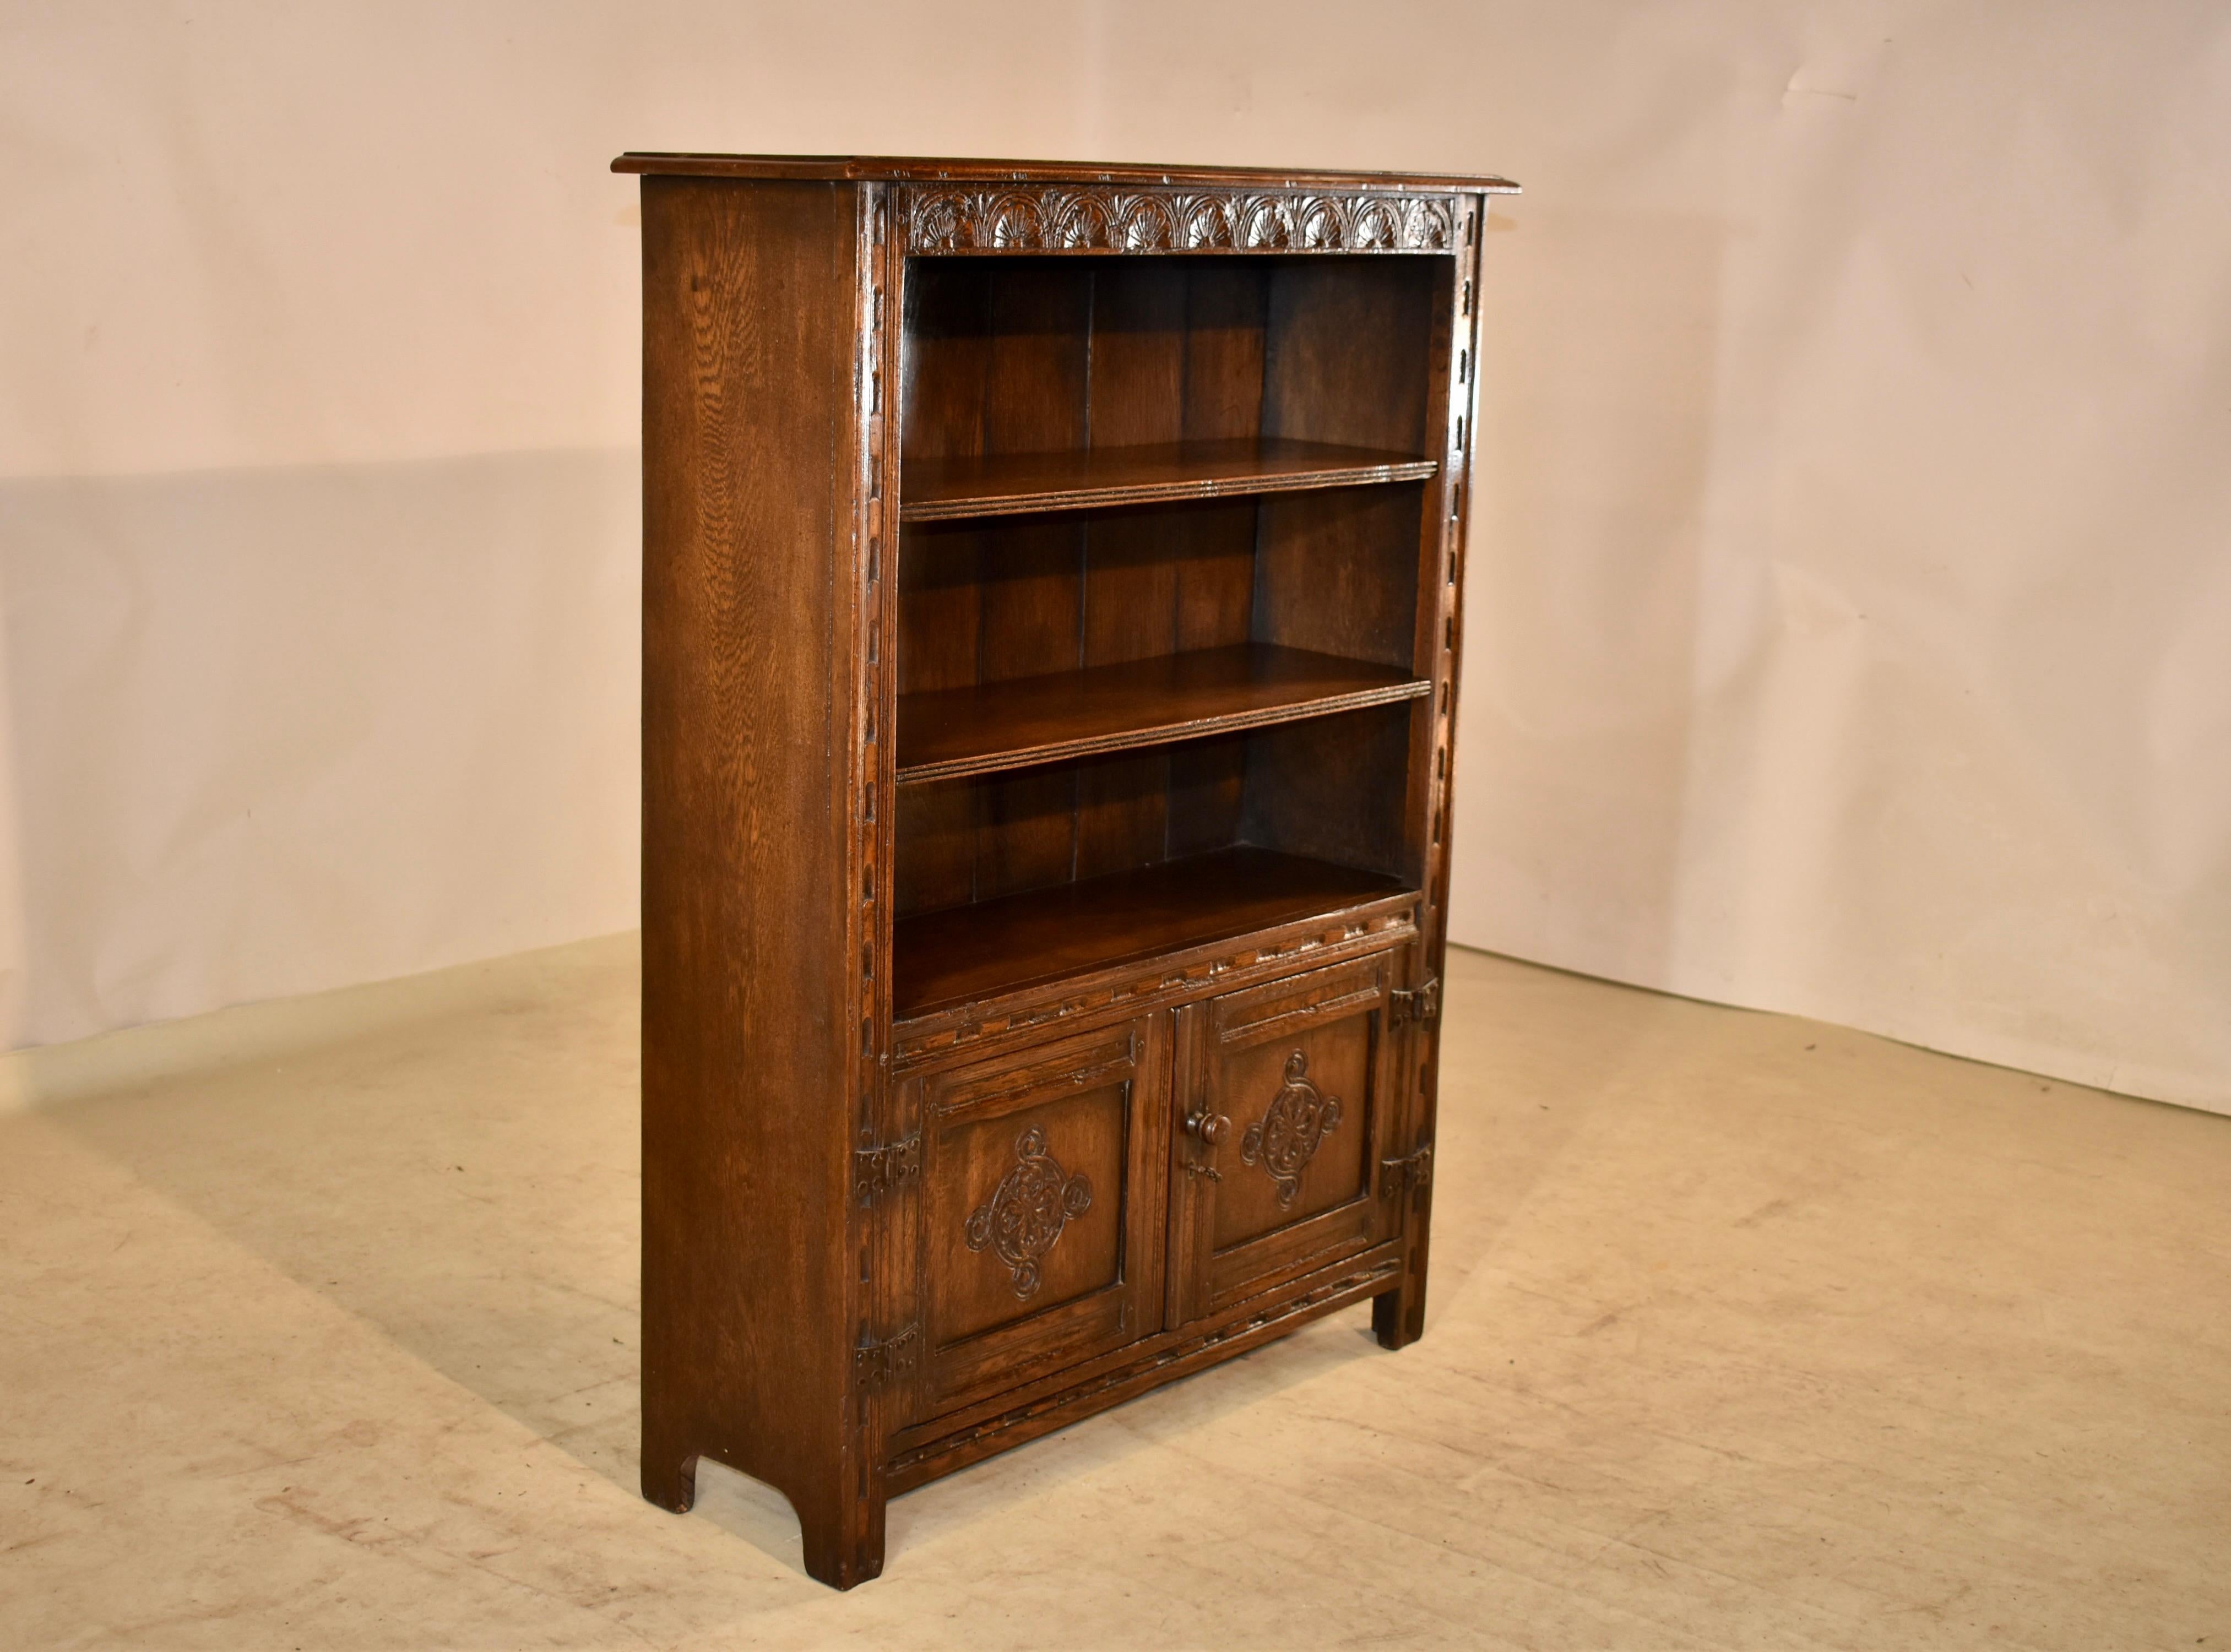 Circa 1900 oak bookcase from England. The top has a beveled edge, following down to simple sides and hand carving on the front of the case and front of the shelves. There are three stationary shelves, overt lower doors, which open to reveal storage.